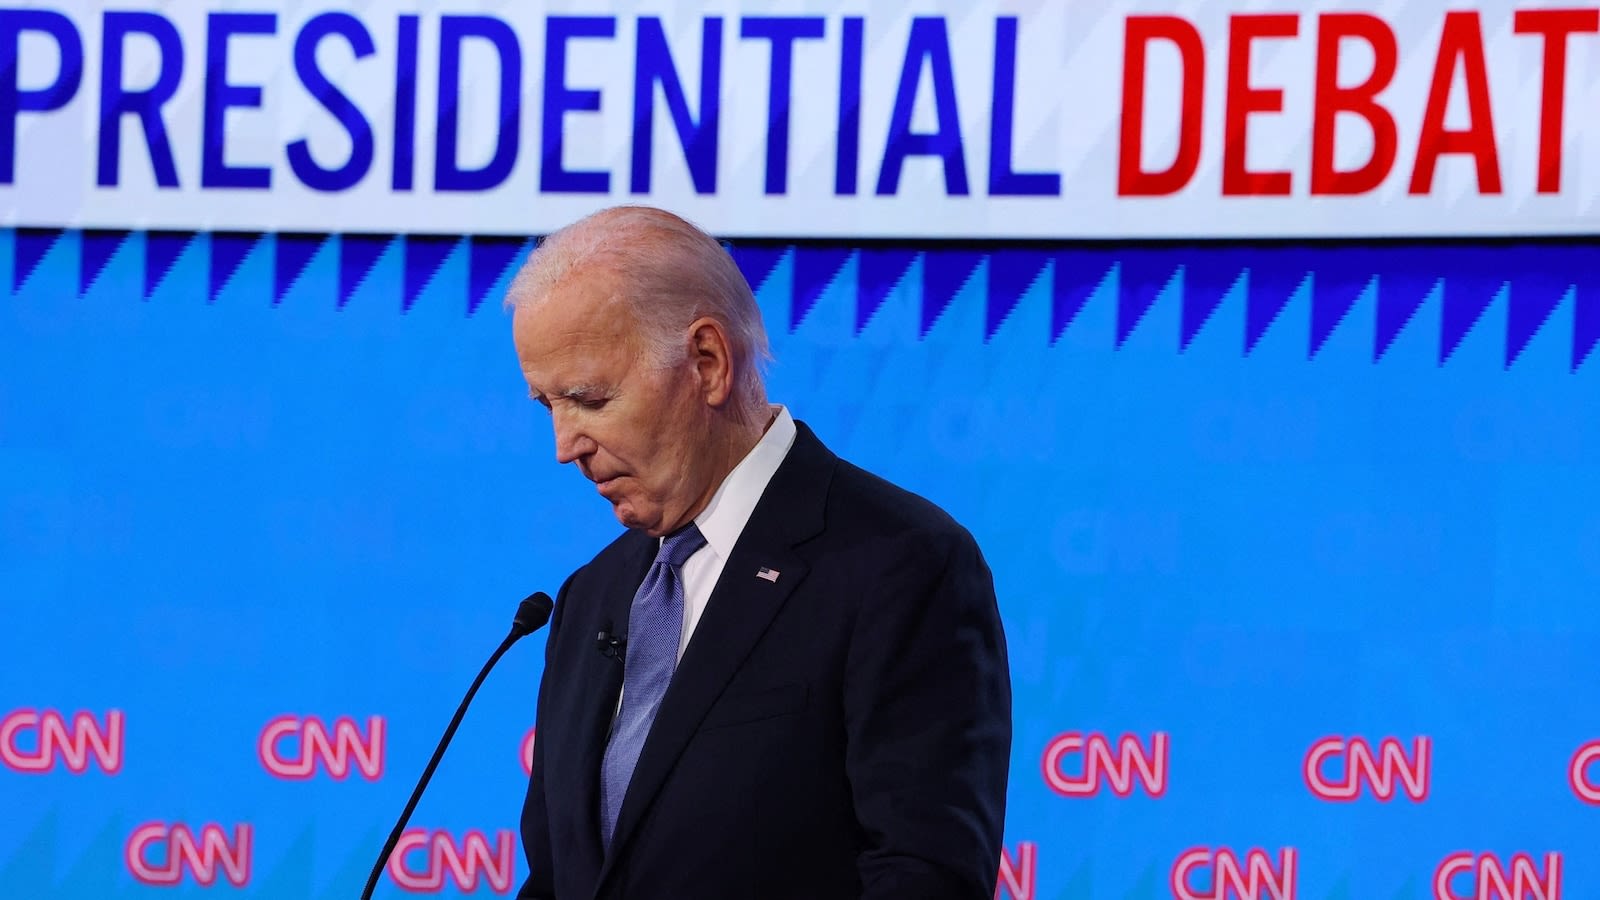 What the Democrats doubting Biden have in common